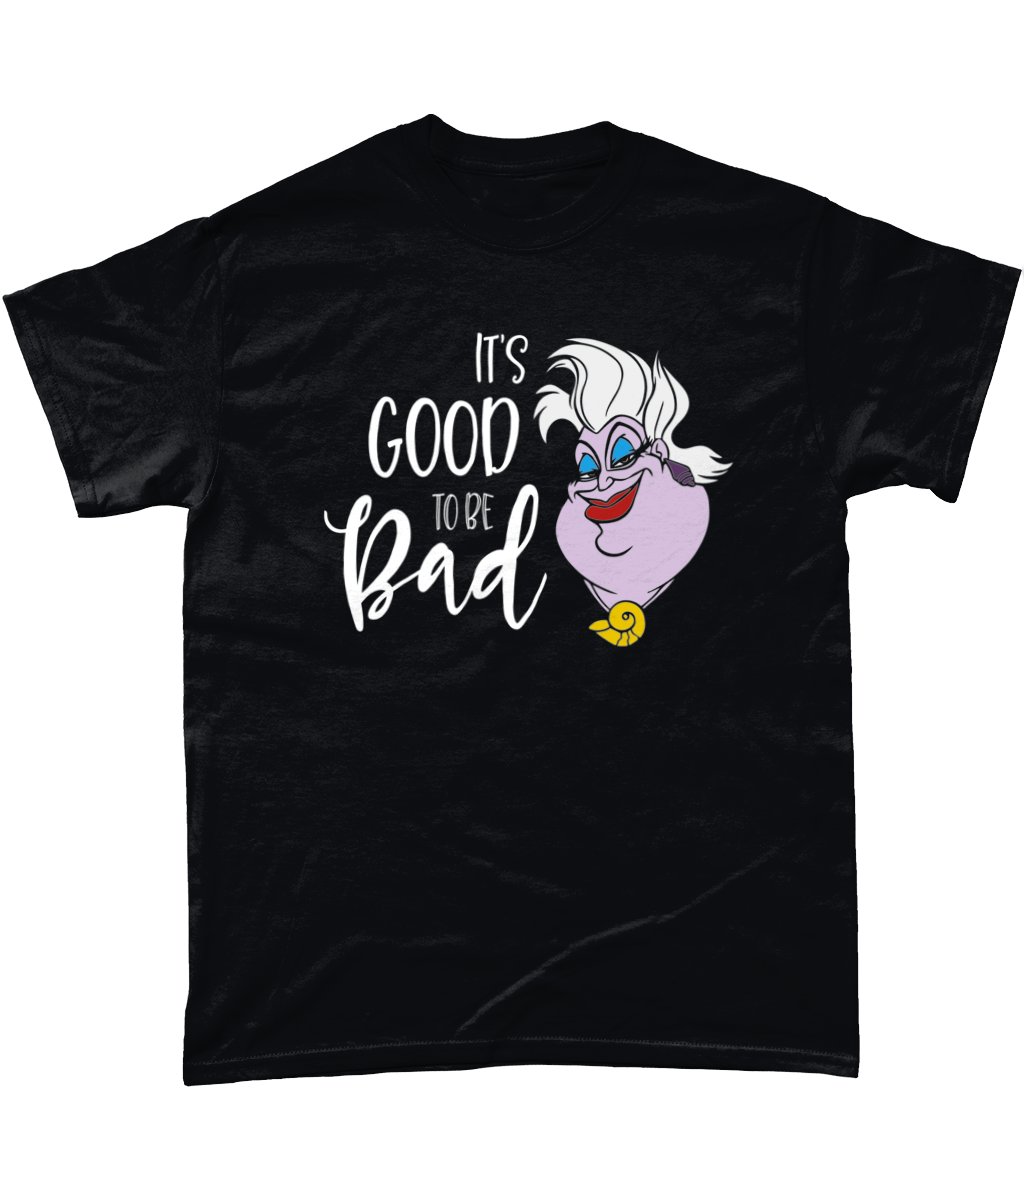 It's Good To Be Bad: T-Shirt